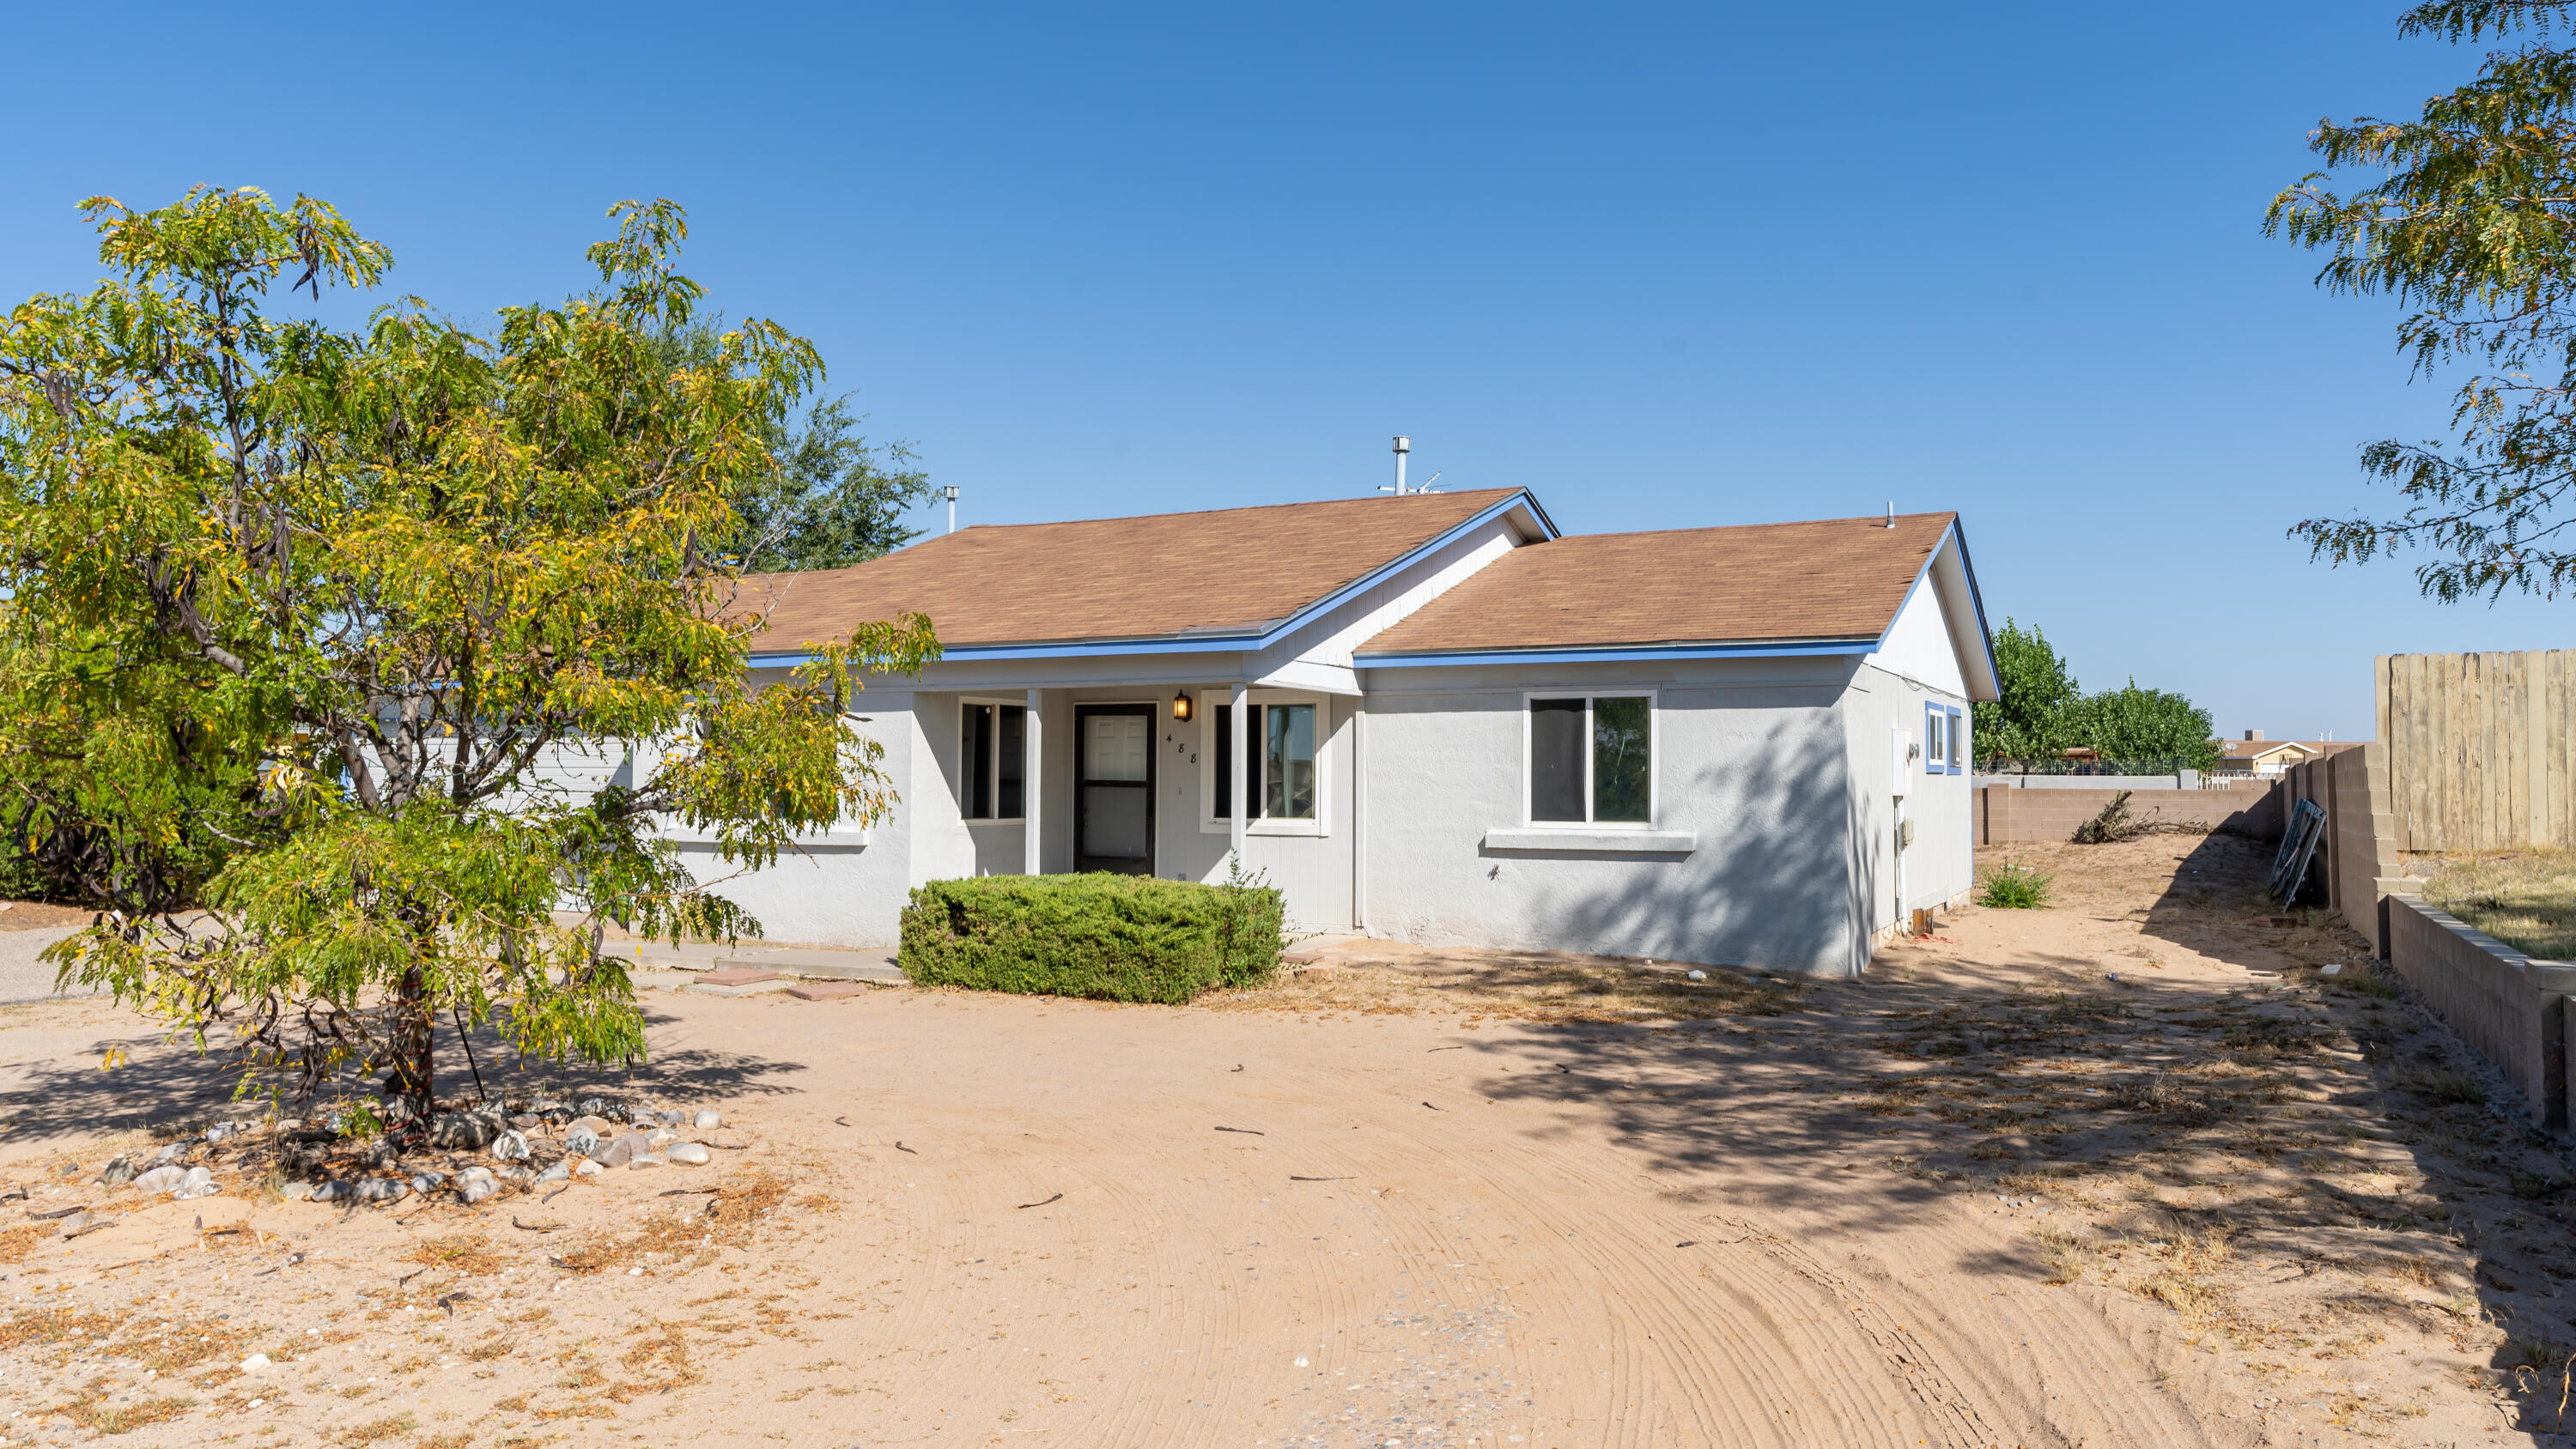 Open House: Saturday, Oct. 1st 12pm to 3pm and Sunday, Oct. 2nd 11am to 4pm. WHAT A GREAT FIRST STARTER HOME OR INVESTMENT PROPERTY!  This home has 3 bedrooms, 2 bathrooms, is 1181 sq feet and has 2 bonus rooms (converted garage with an additional 485 sq feet). Enjoy a nice large back yard with lots of room for your own creative landscaping and garden.   Needs some upgrading and TLC.  Some interior and exterior painting have been completed by the seller. Property is being sold ''as is''.